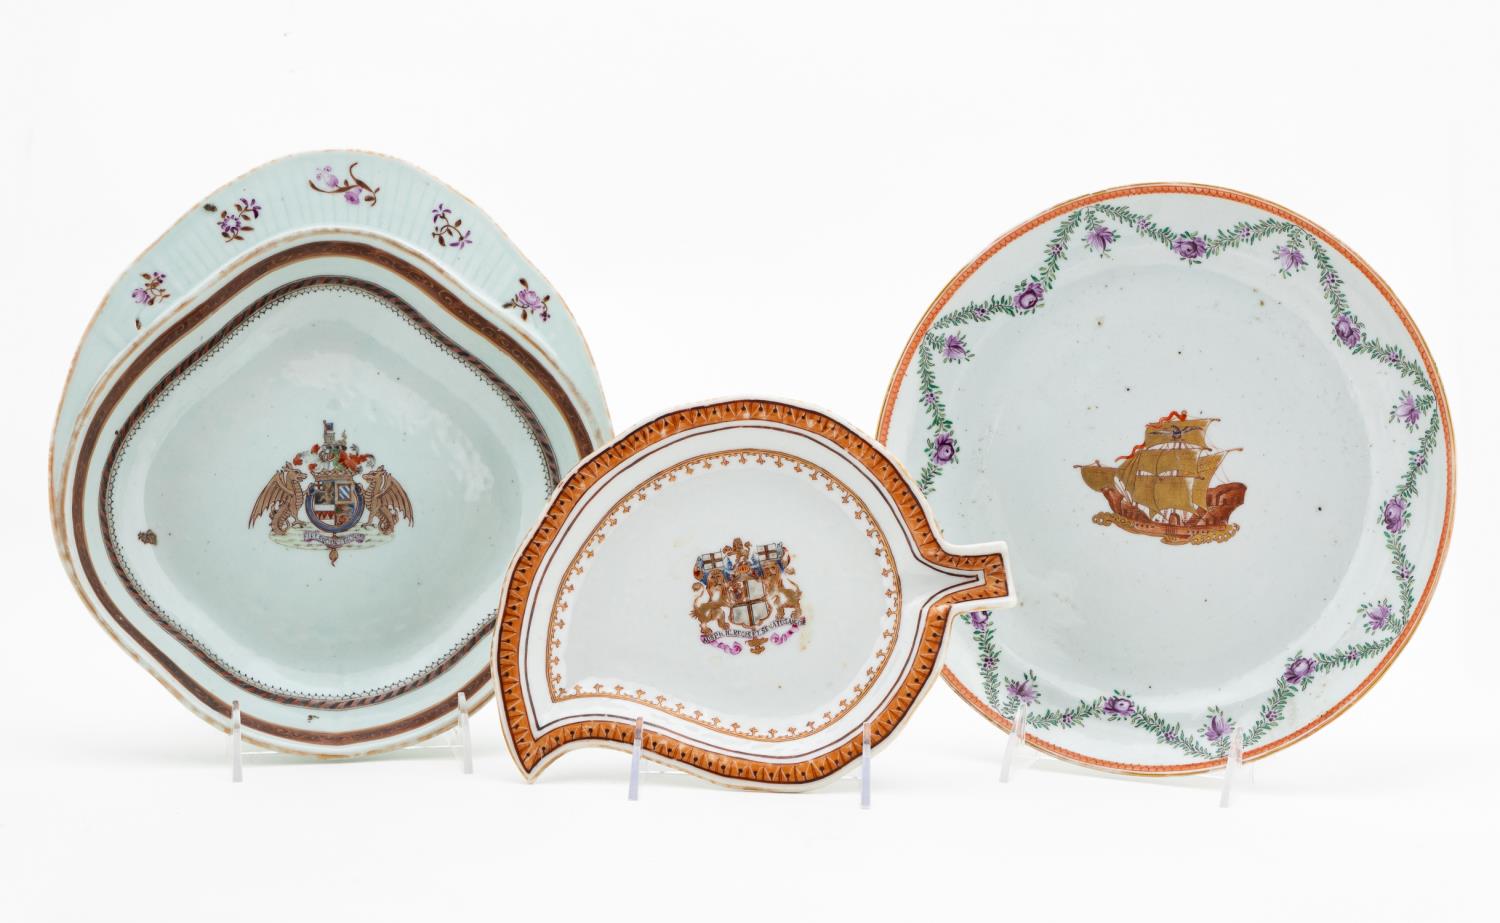 3PC CHINESE EXPORT ARMORIAL PORCELAIN 35c28a